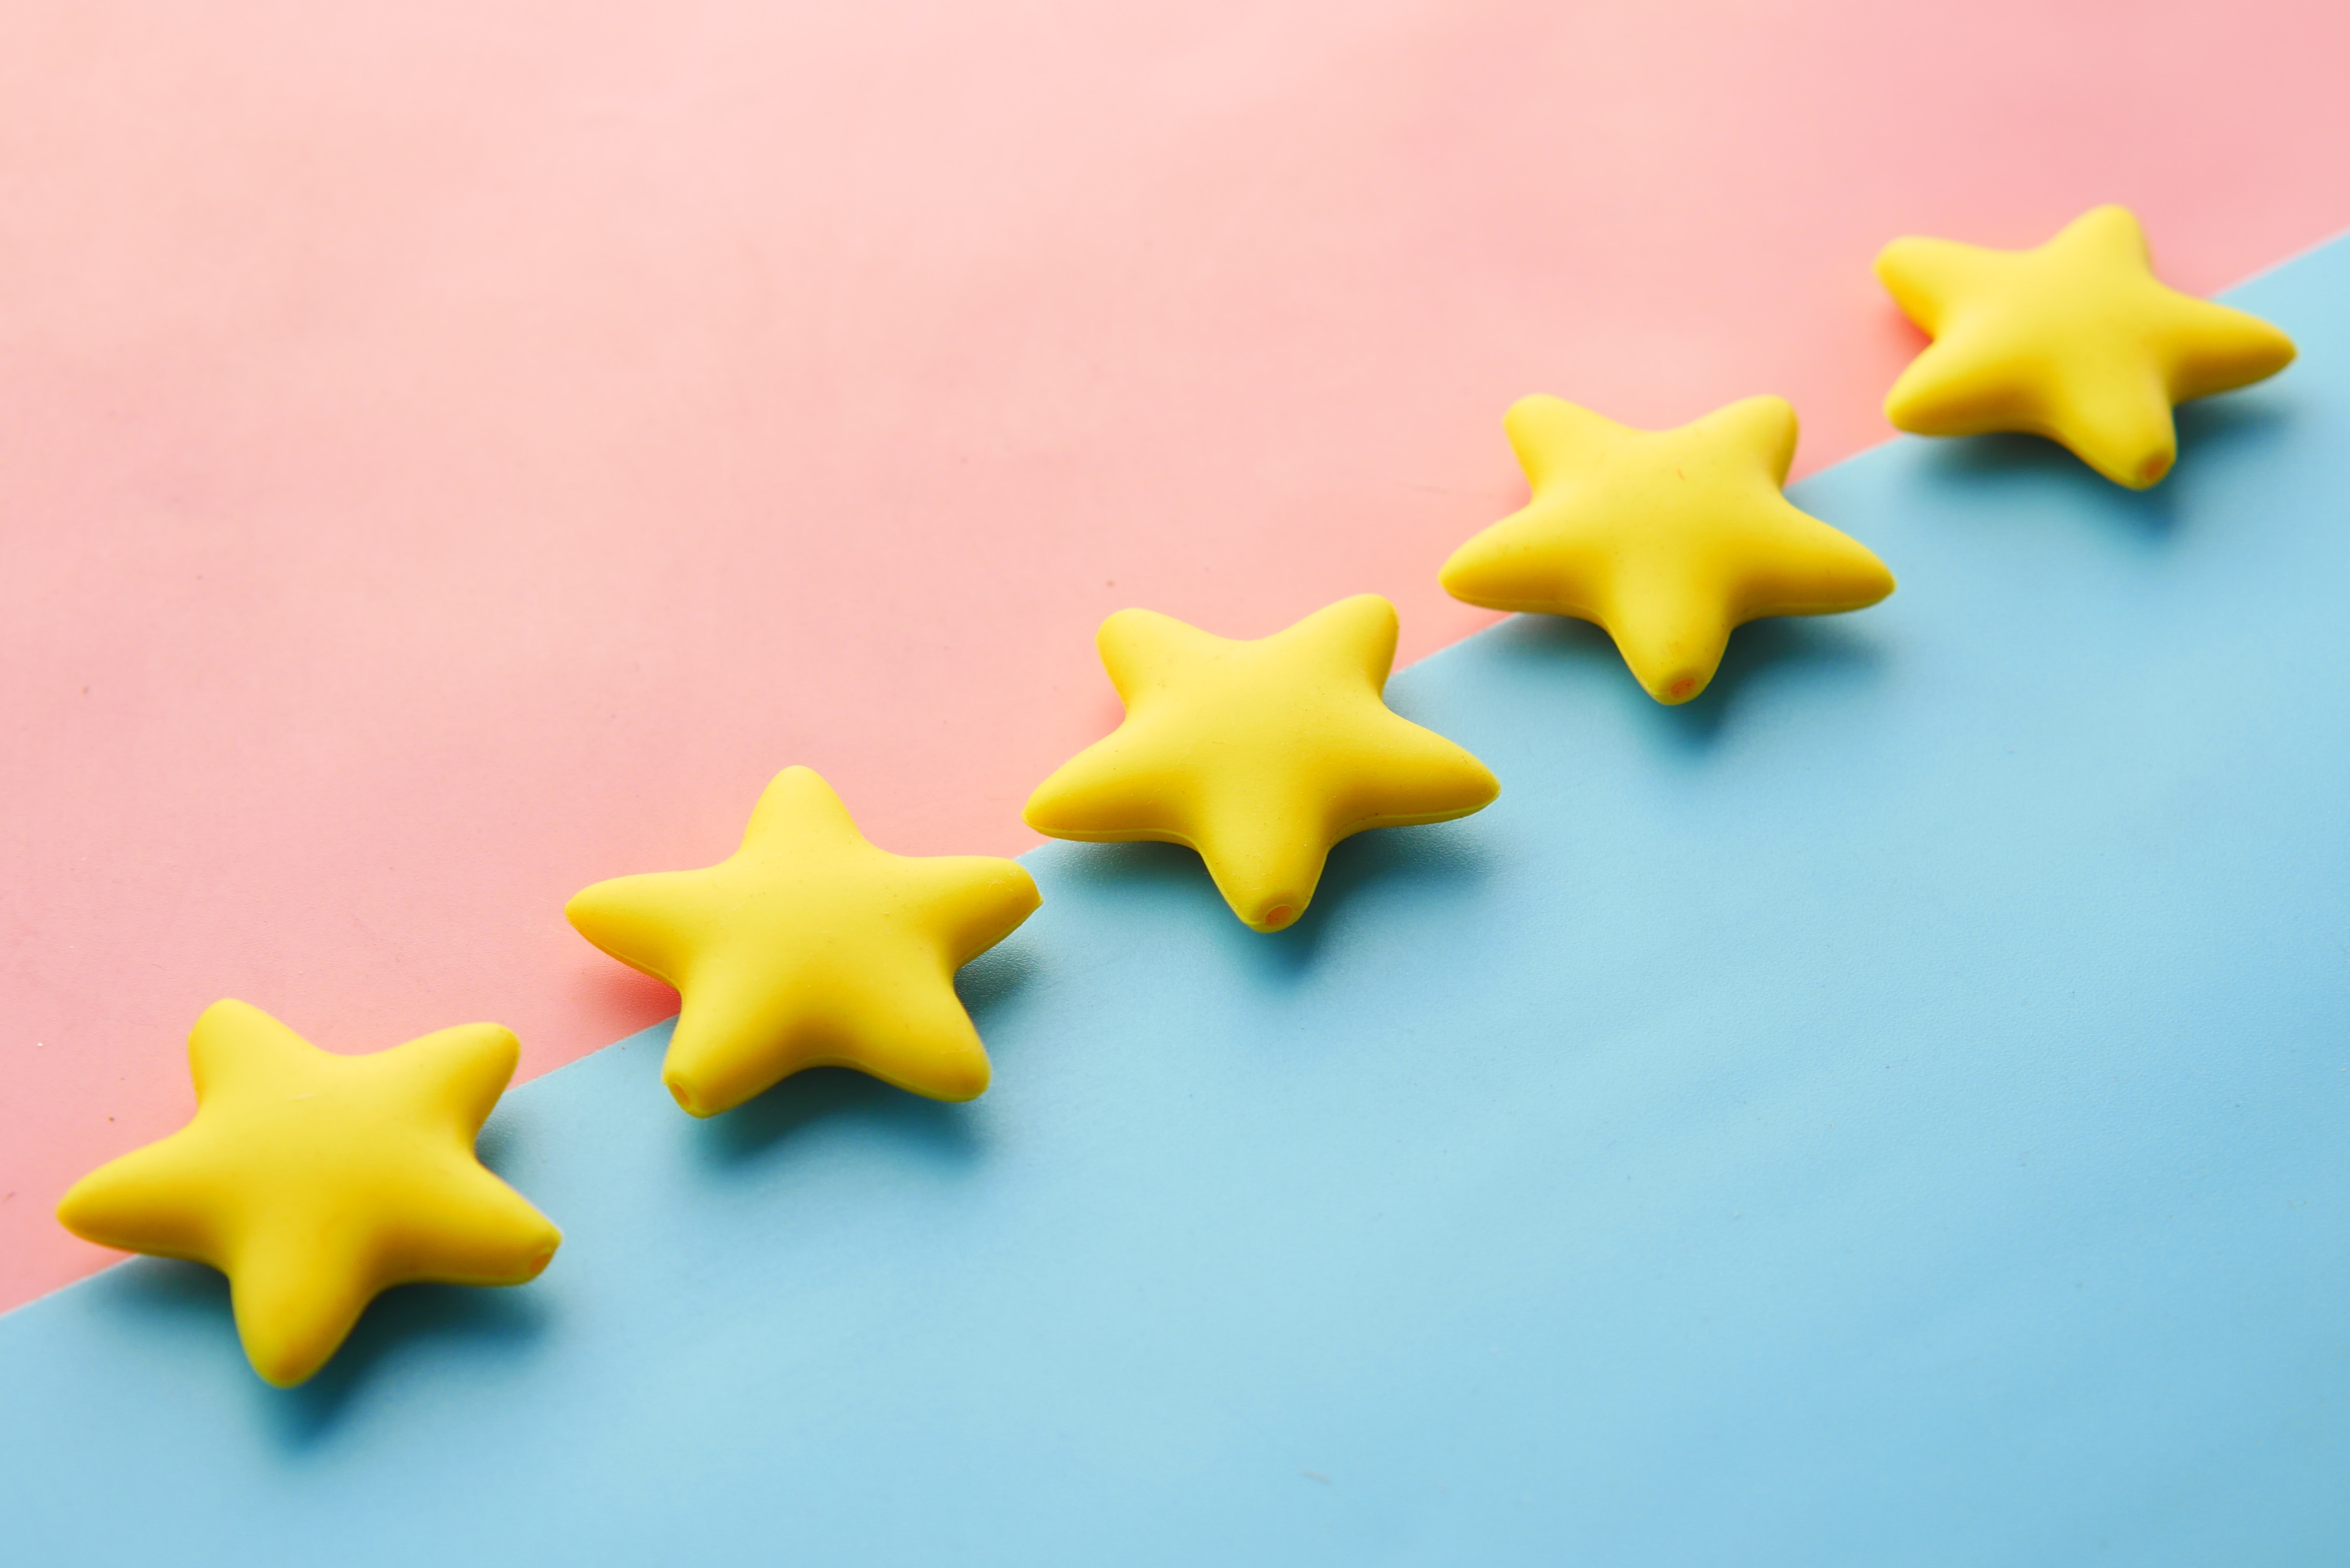 Gold stars on pink and blue background